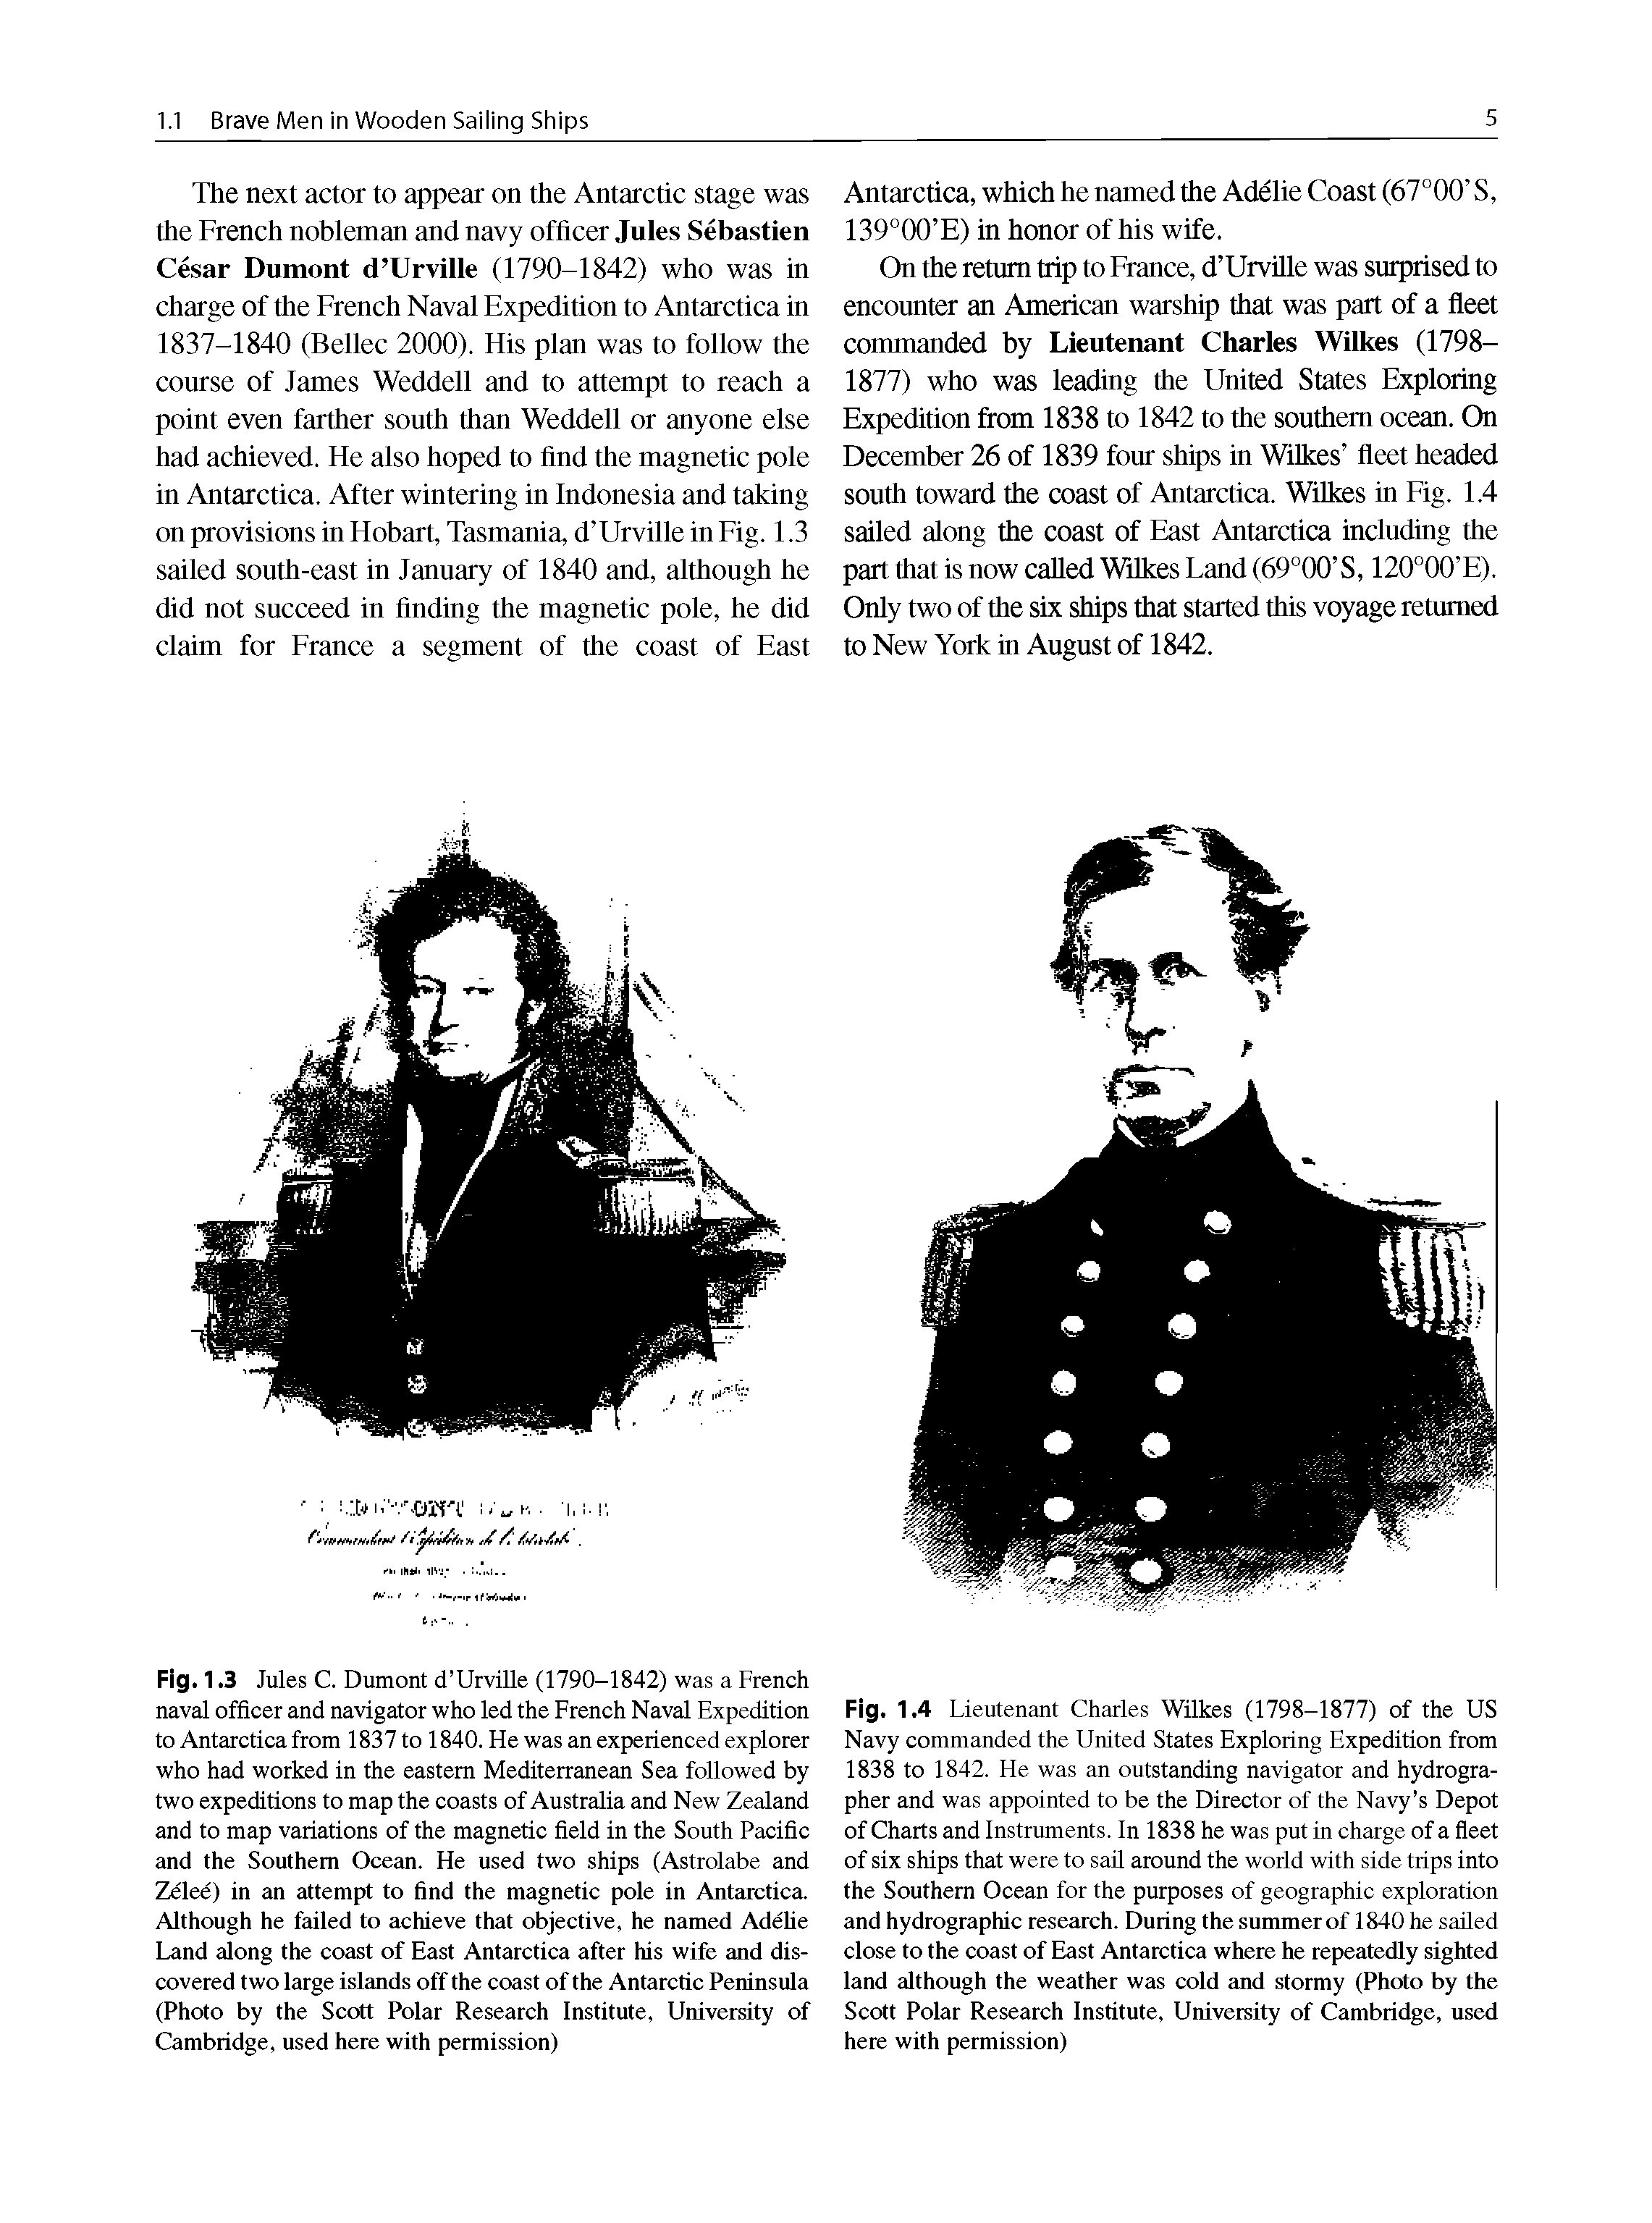 Fig. 1.3 Jules C. Dumont d Urville (1790-1842) was a French naval officer and navigator who led the French Naval Expedition to Antarctica from 1837 to 1840. He was an experienced explorer who had worked in the eastern Mediterranean Sea followed by two expeditions to map the coasts of Australia and New Zealand and to map variations of the magnetic field in the South Pacific euid the Southern Ocean. He used two ships (Astrolabe and Zelee) in eui attempt to find the magnetic pole in Antarctica Although he failed to achieve that objective, he named Adelie Land along the coast of East Antarctica after his wife and discovered two large islands off the coast of the Antarctic Peninsula (Photo by the Scott Polar Research Institute, University of Cambridge, used here with permission)...